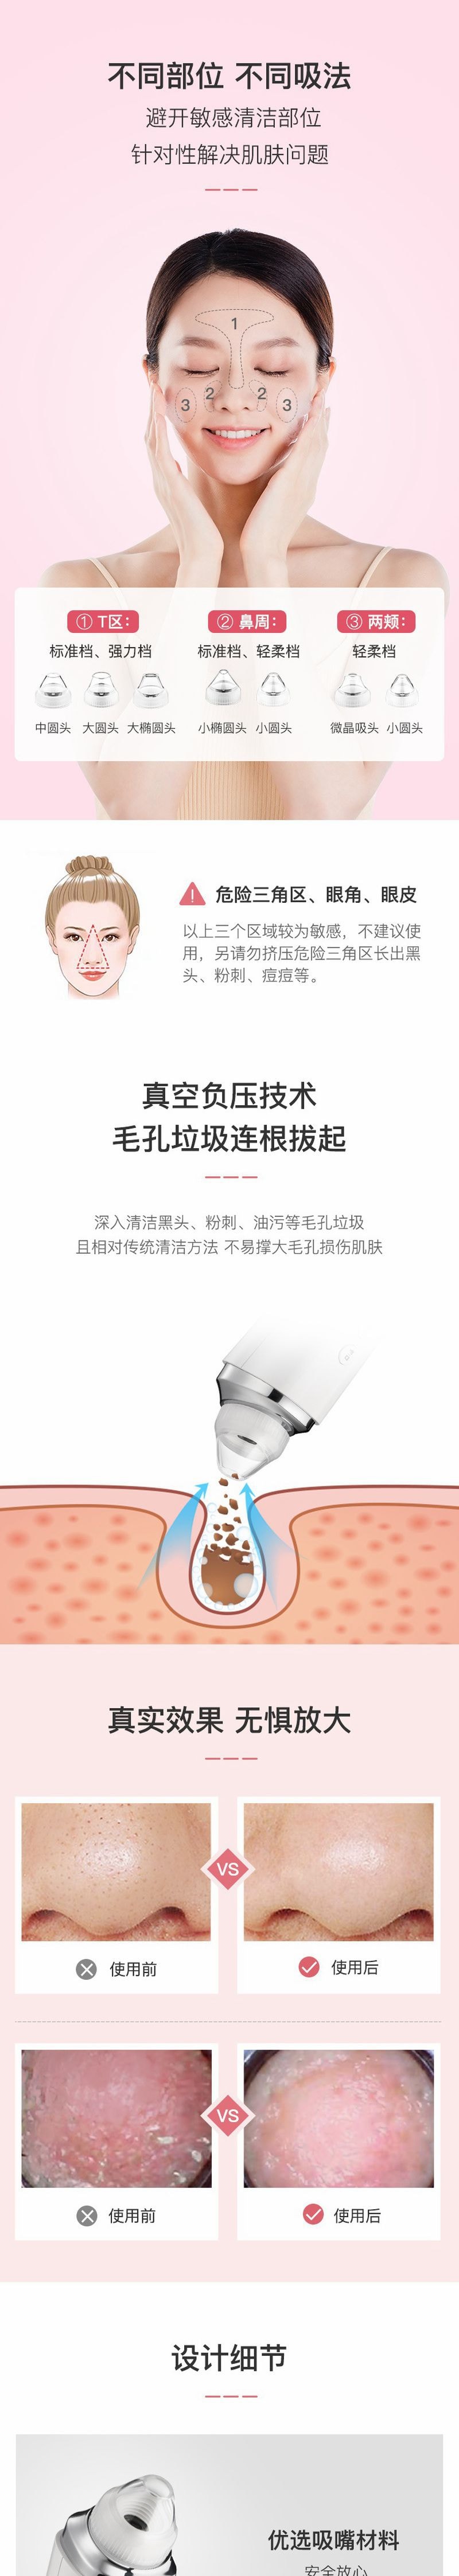 Visualization Pore Cleansing Electric Blackhead Beauty Instrument [5-7 Days U.S. Free Shipping]